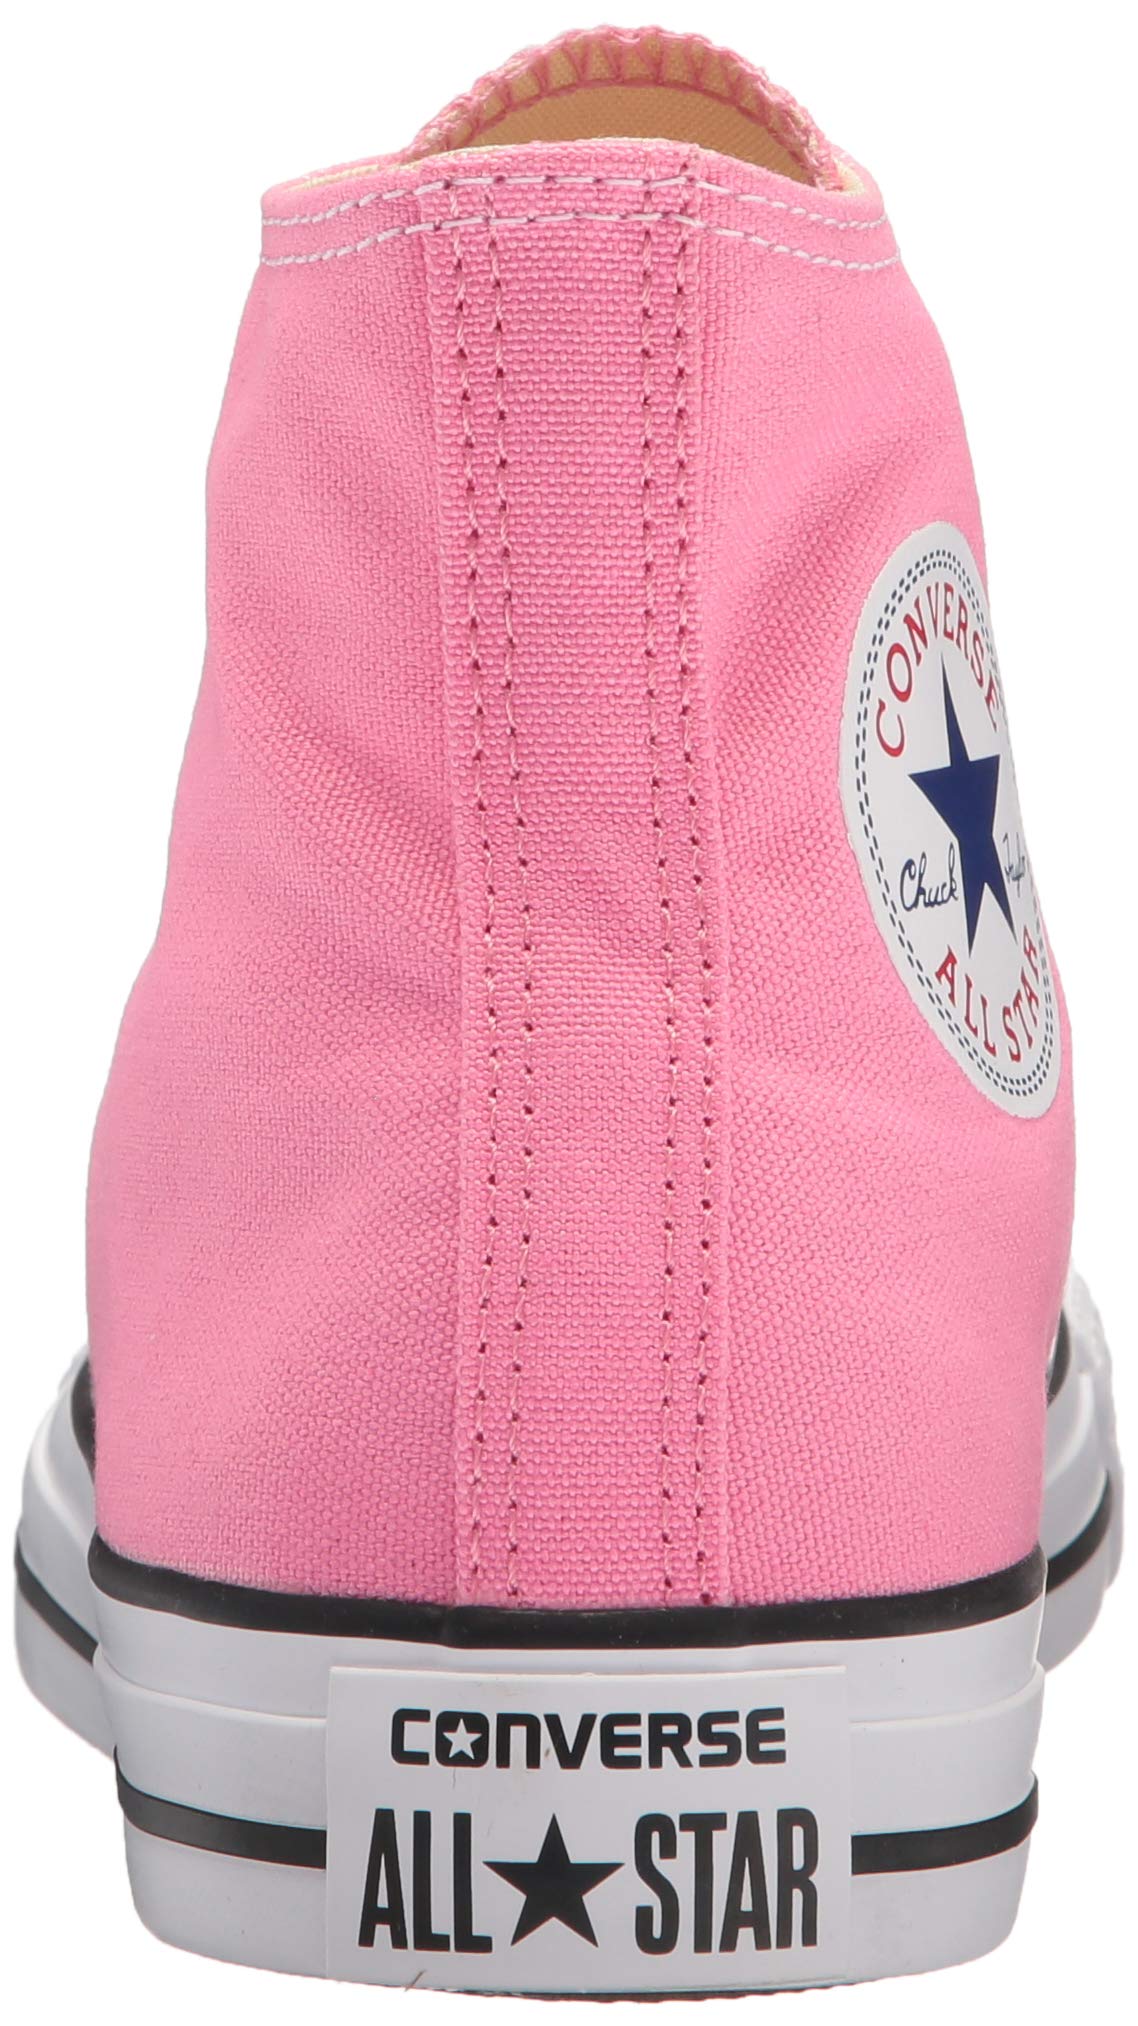 Converse Chuck Taylor All Star Hi Pink High-Top Fashion Sneaker - 6.5M / 4.5M - image 2 of 10